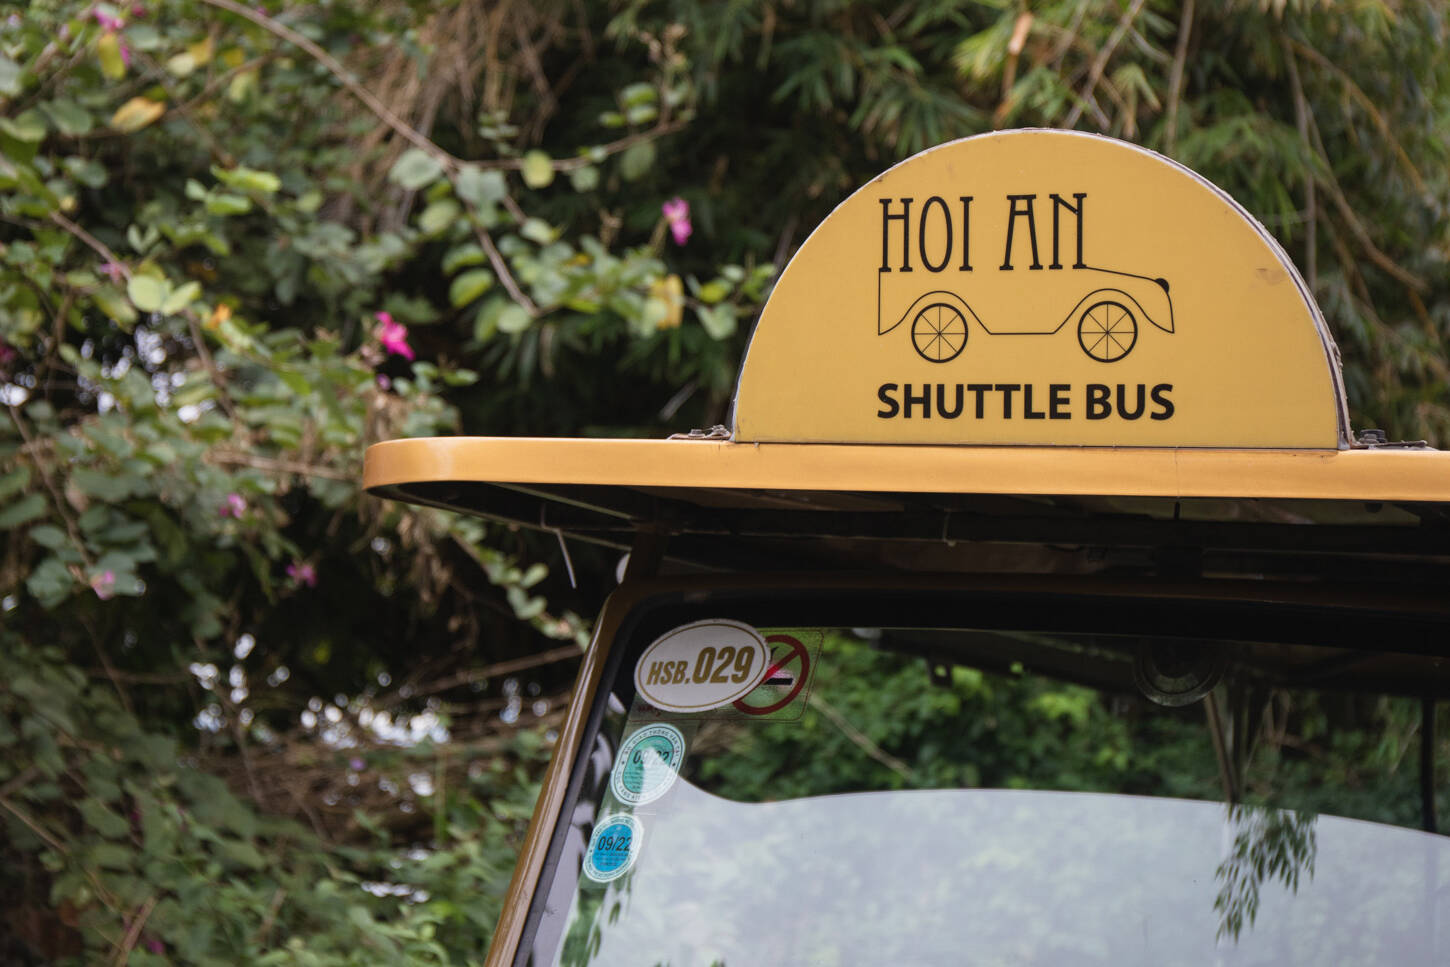 Hoi An shuttle bus - Hoi An boats - Transport in Hoi An and Quang Nam